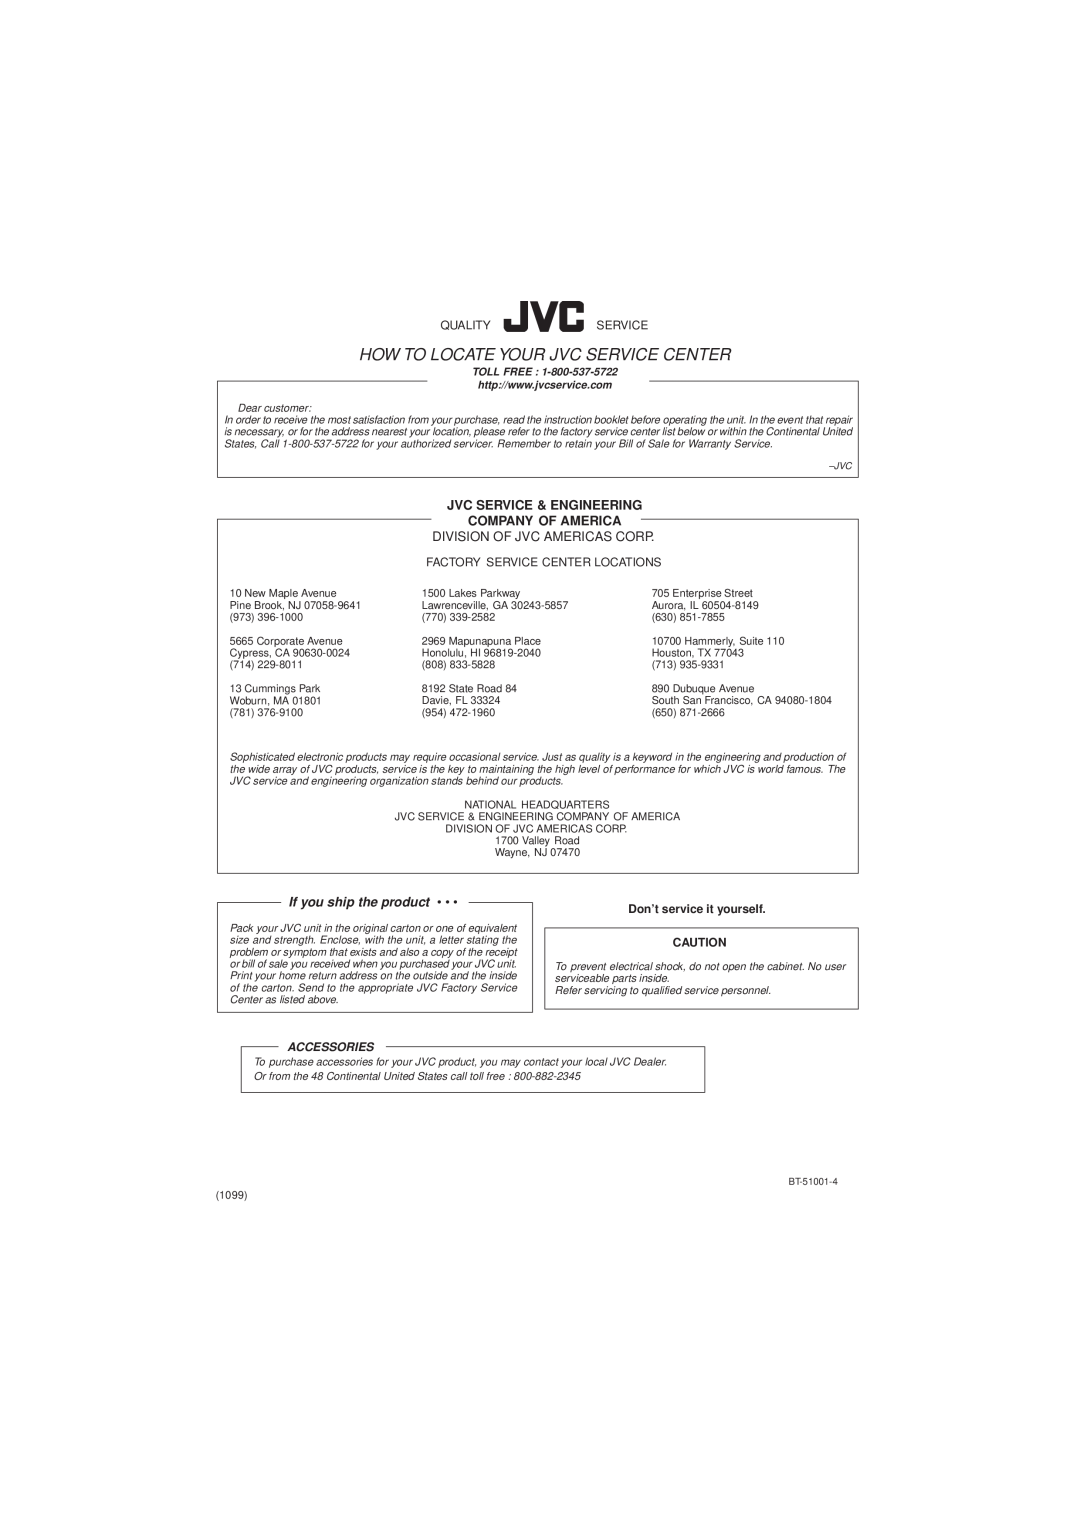 JVC FS-SD550 How To Locate Your Jvc Service Center, Division Of Jvc Americas Corp, If you ship the product, Accessories 